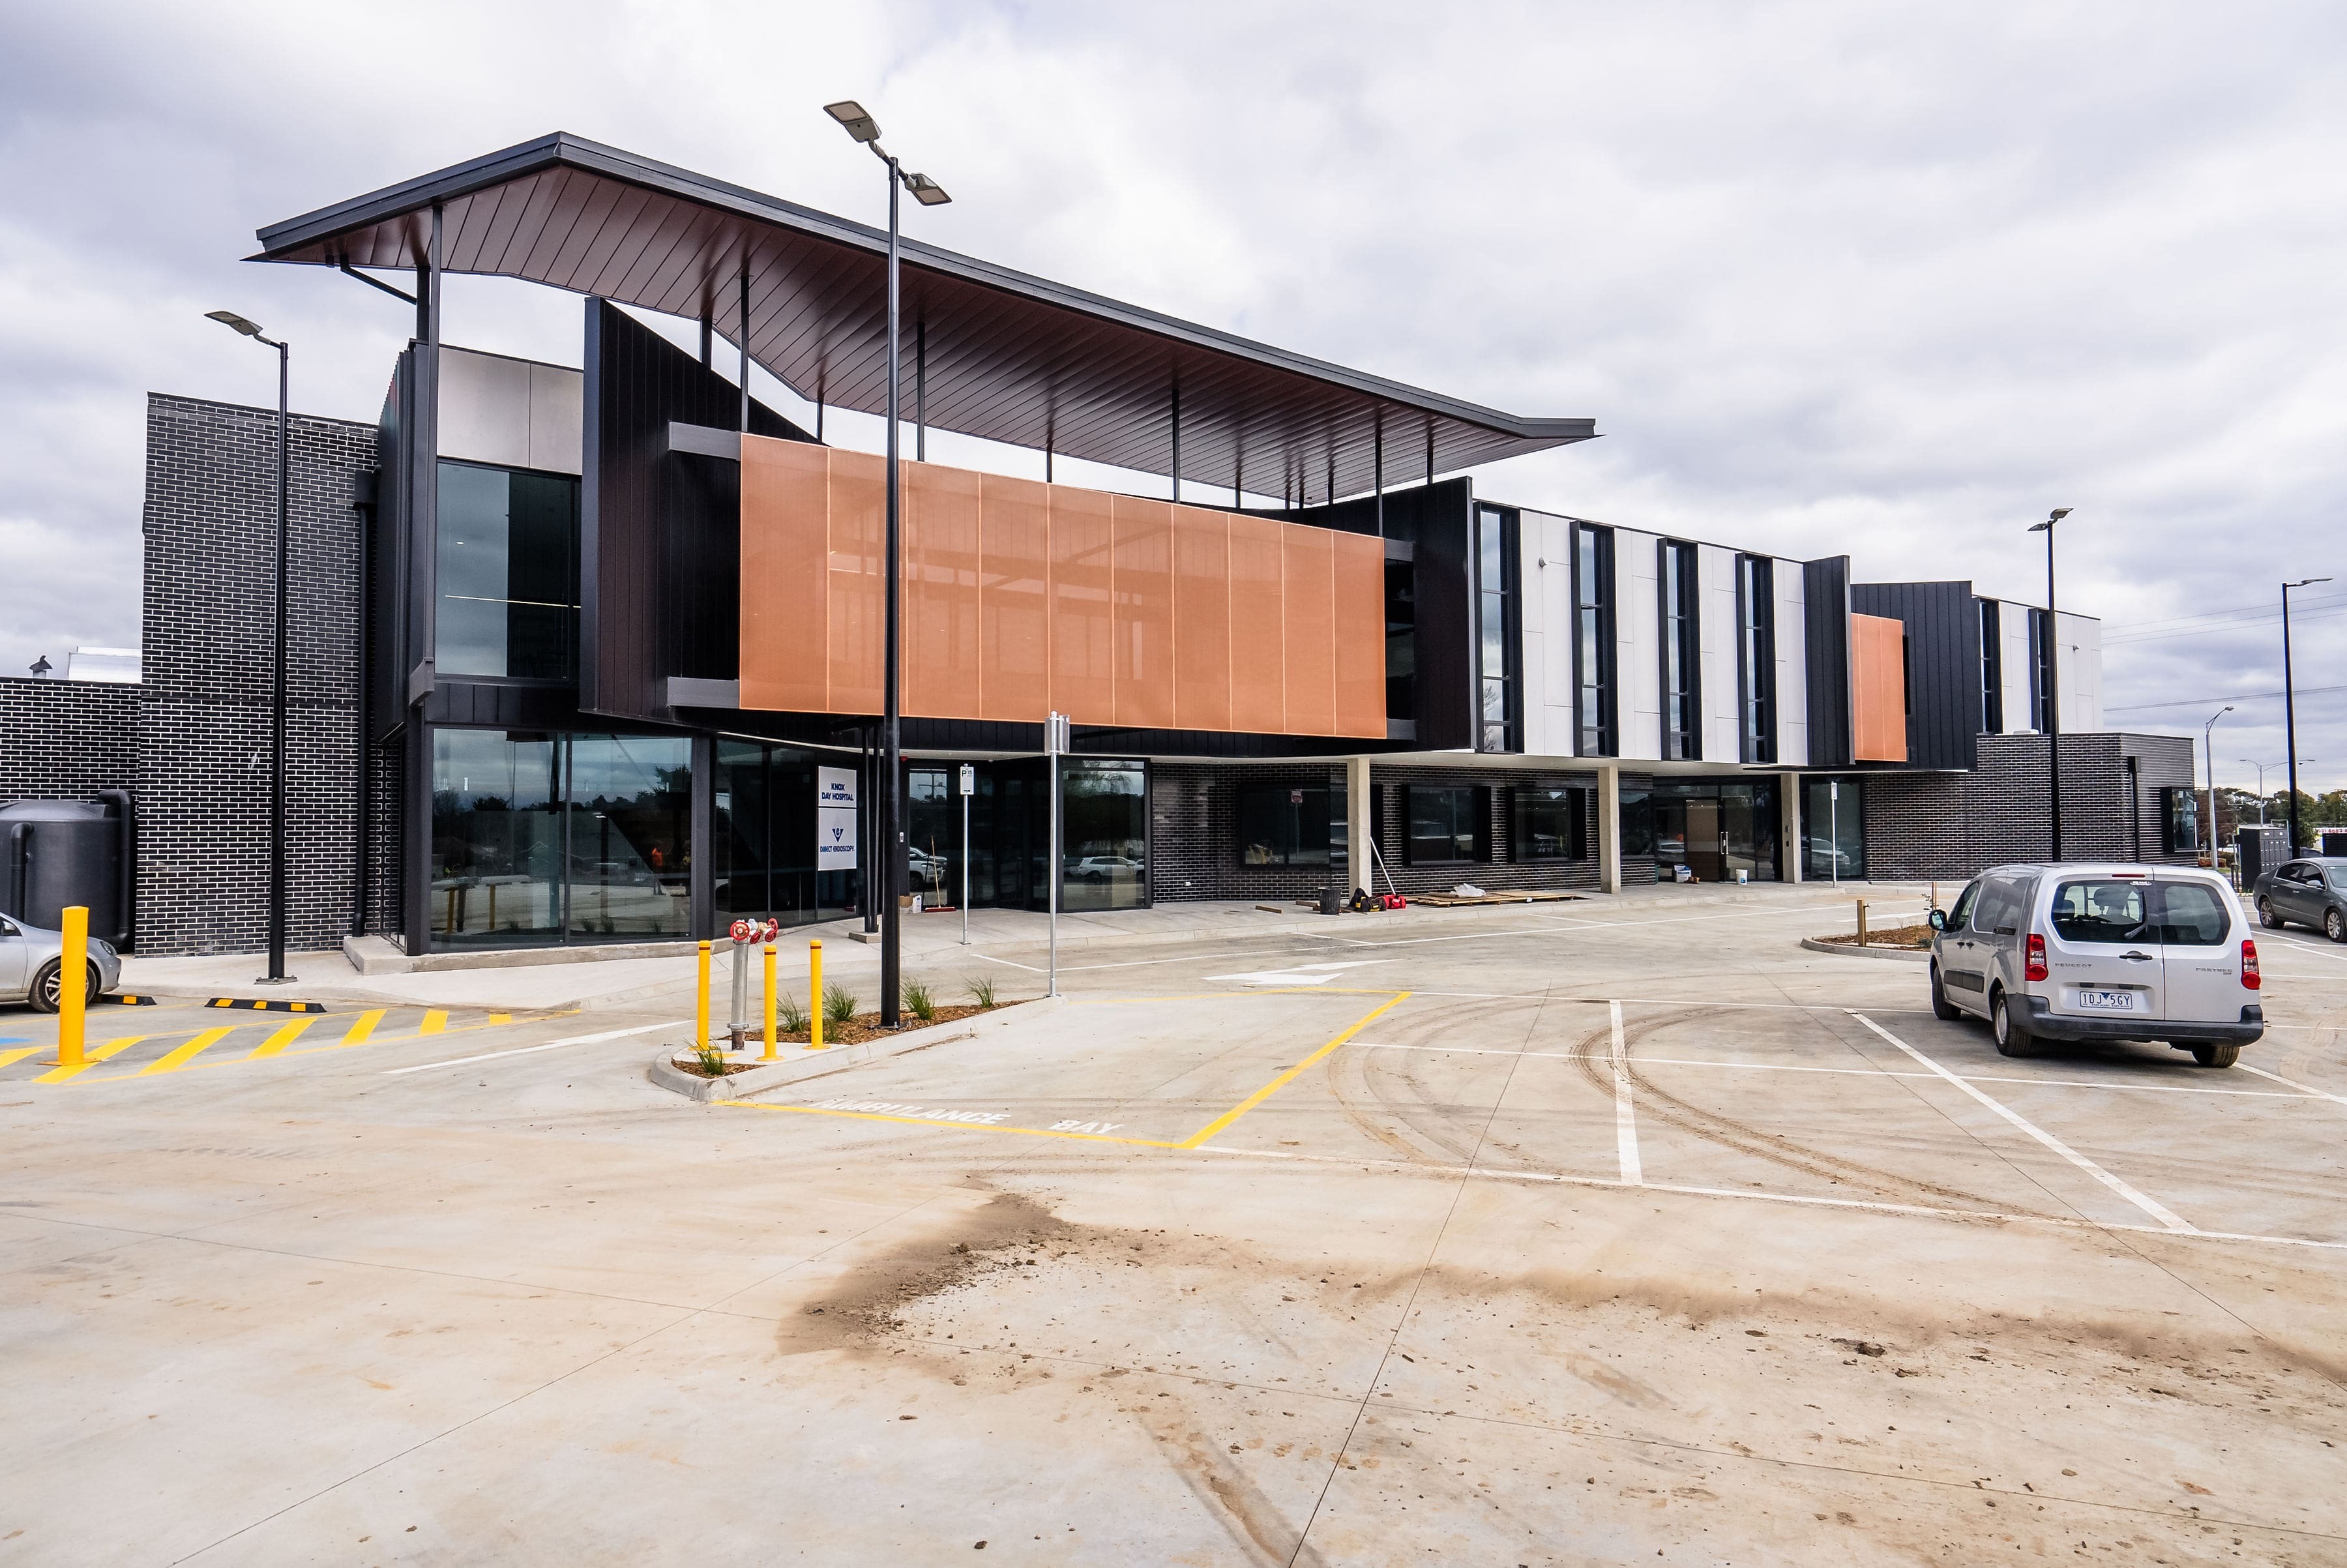 Bayswater Day Surgery and Super Medical Centre 75% Pre-Leased Prior To Completion